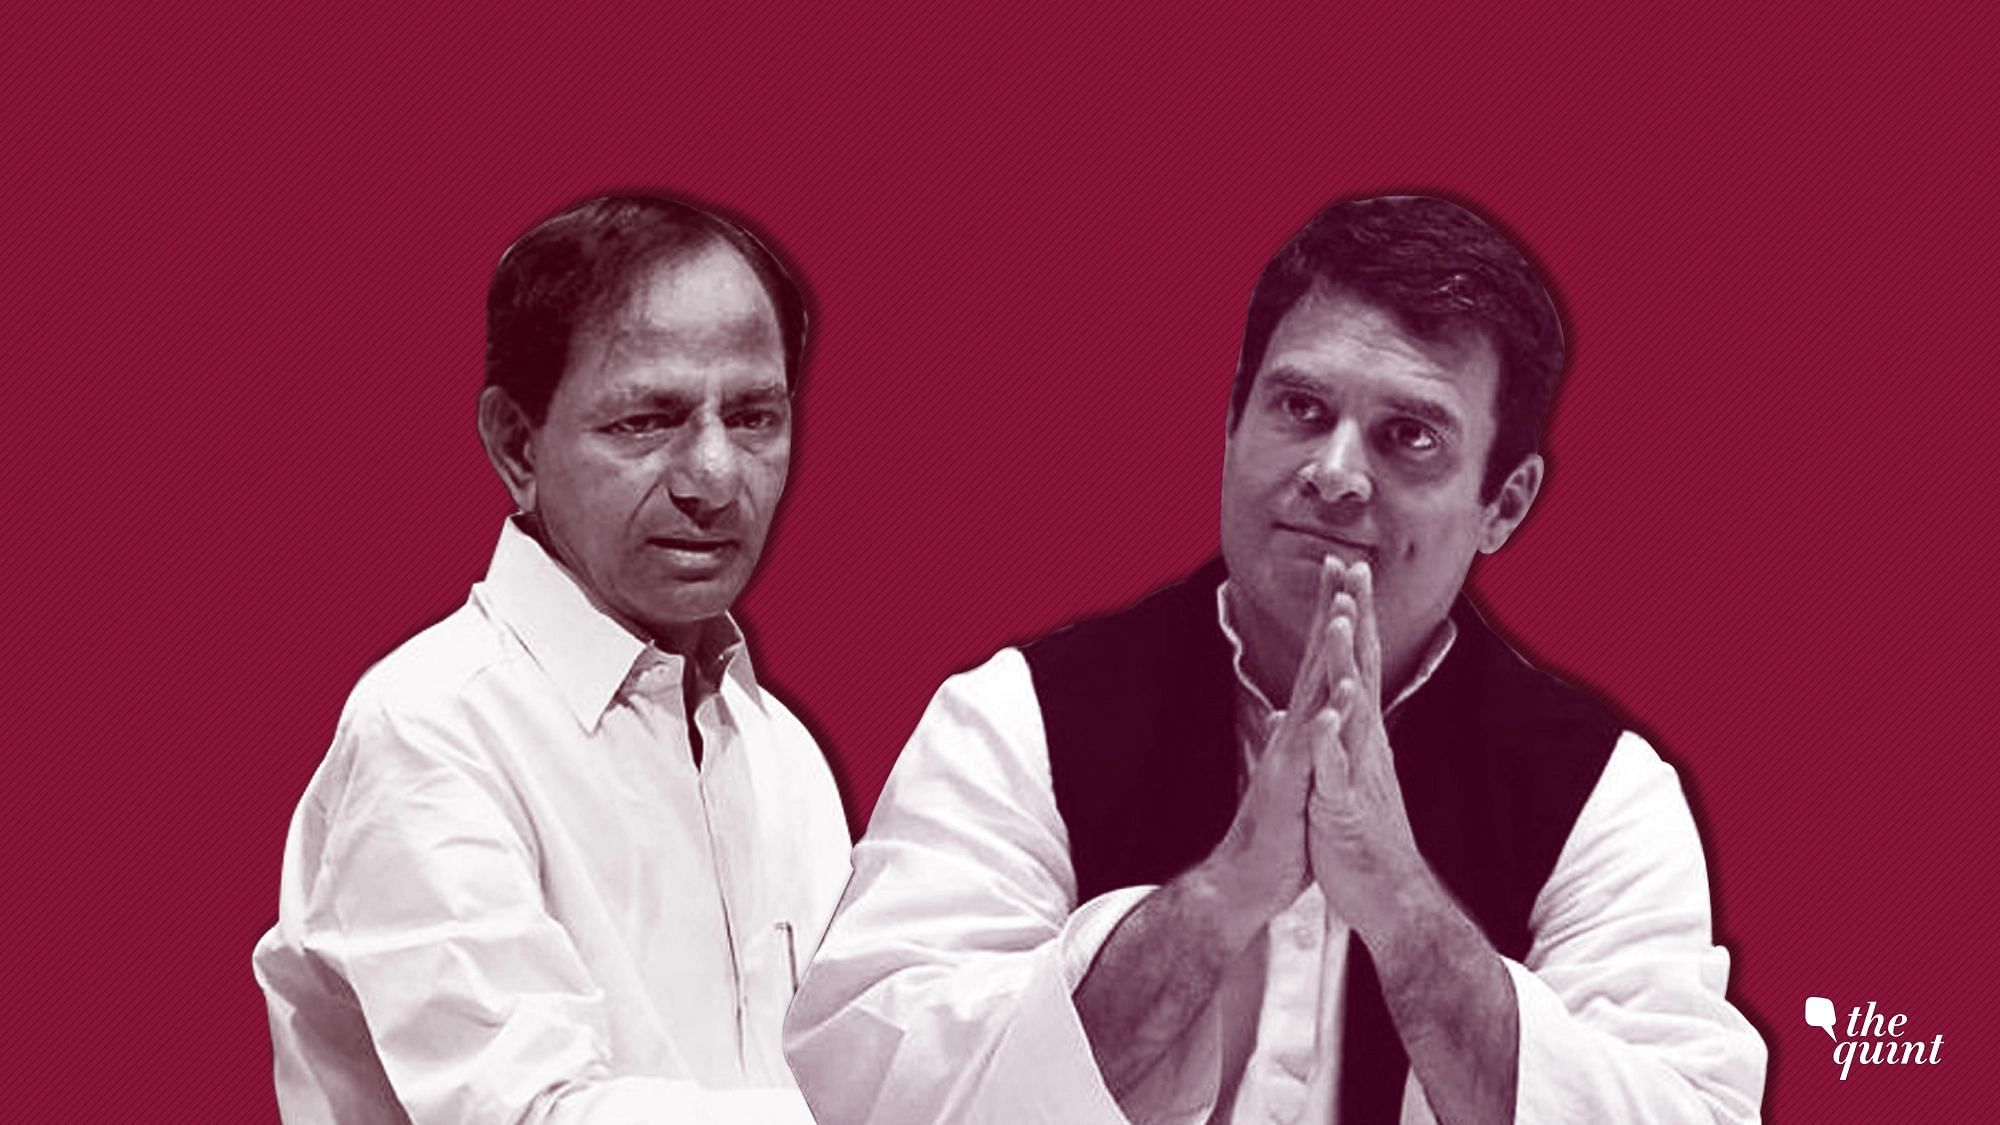 Since the Assembly polls in December 2018, as many as 10 out of the Congress’ 19 MLAs have jumped ship and joined the TRS.